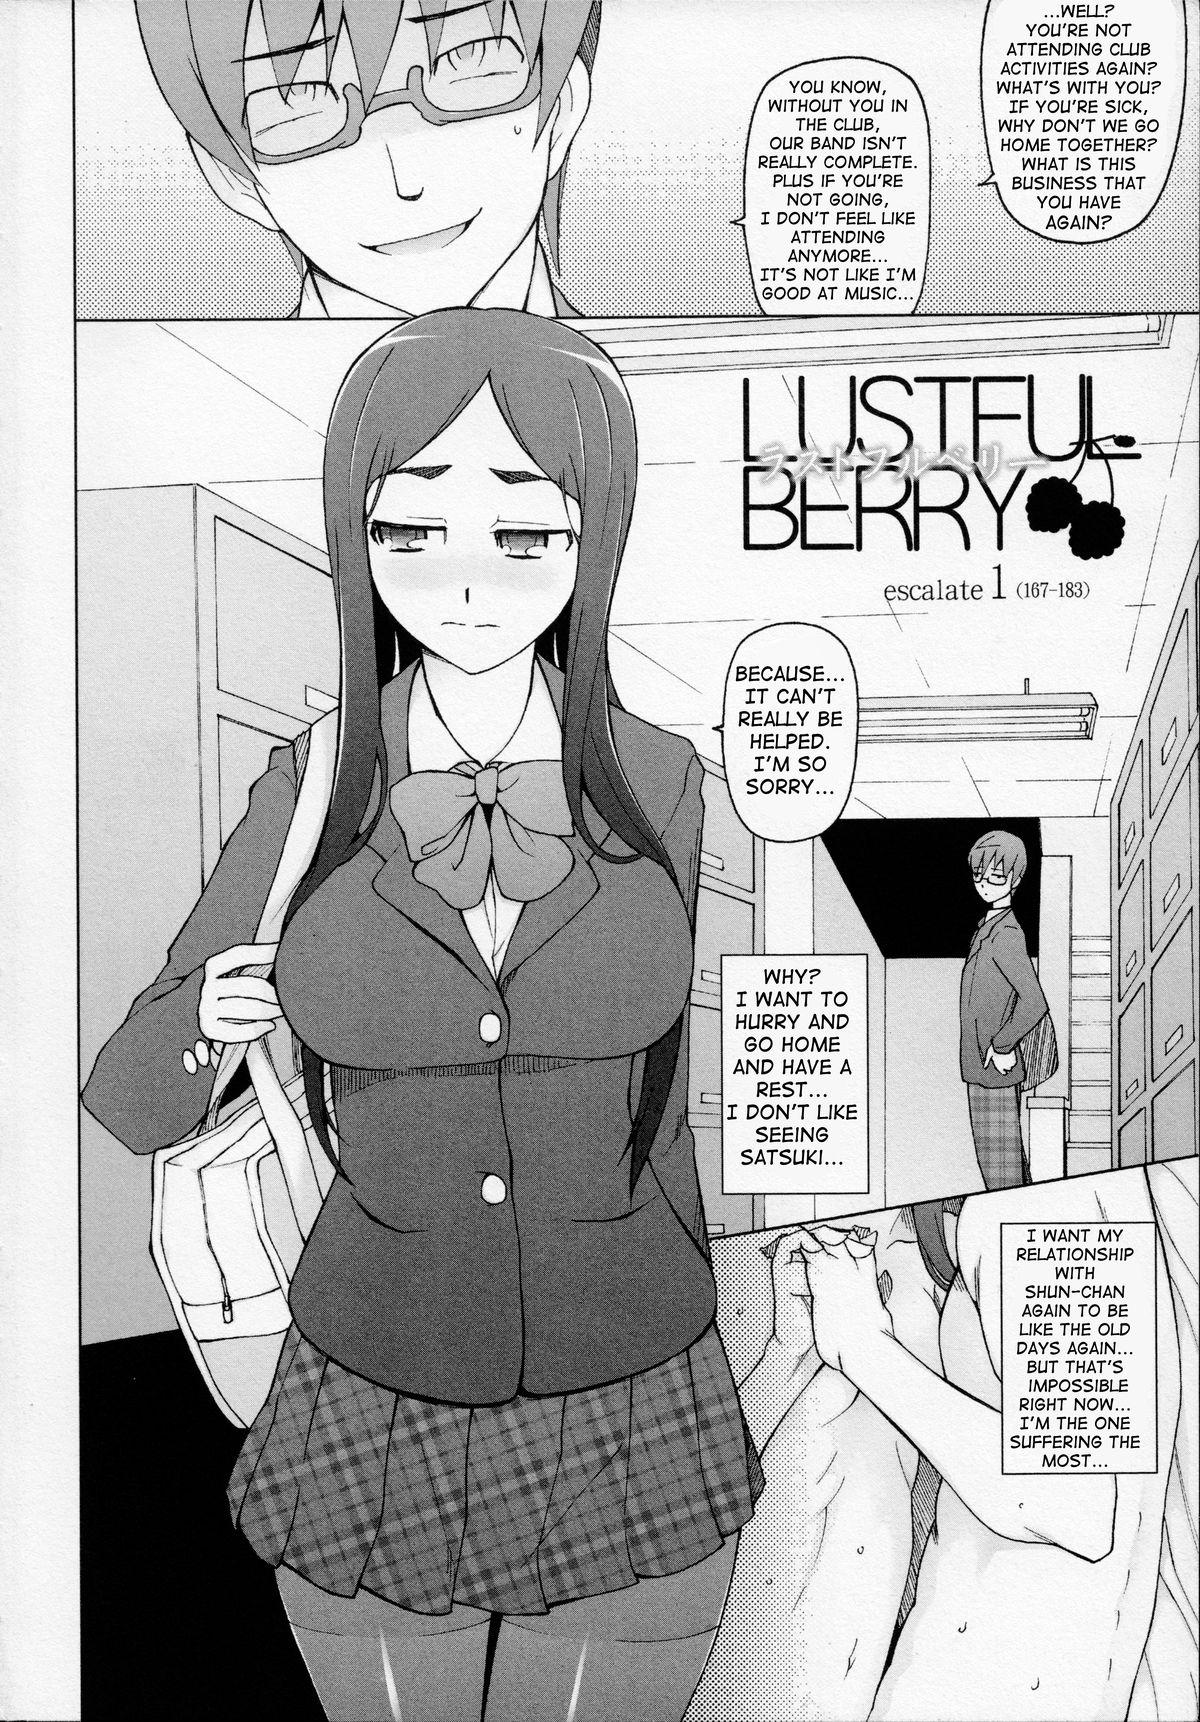 LUSTFUL BERRY Chapter 1 11